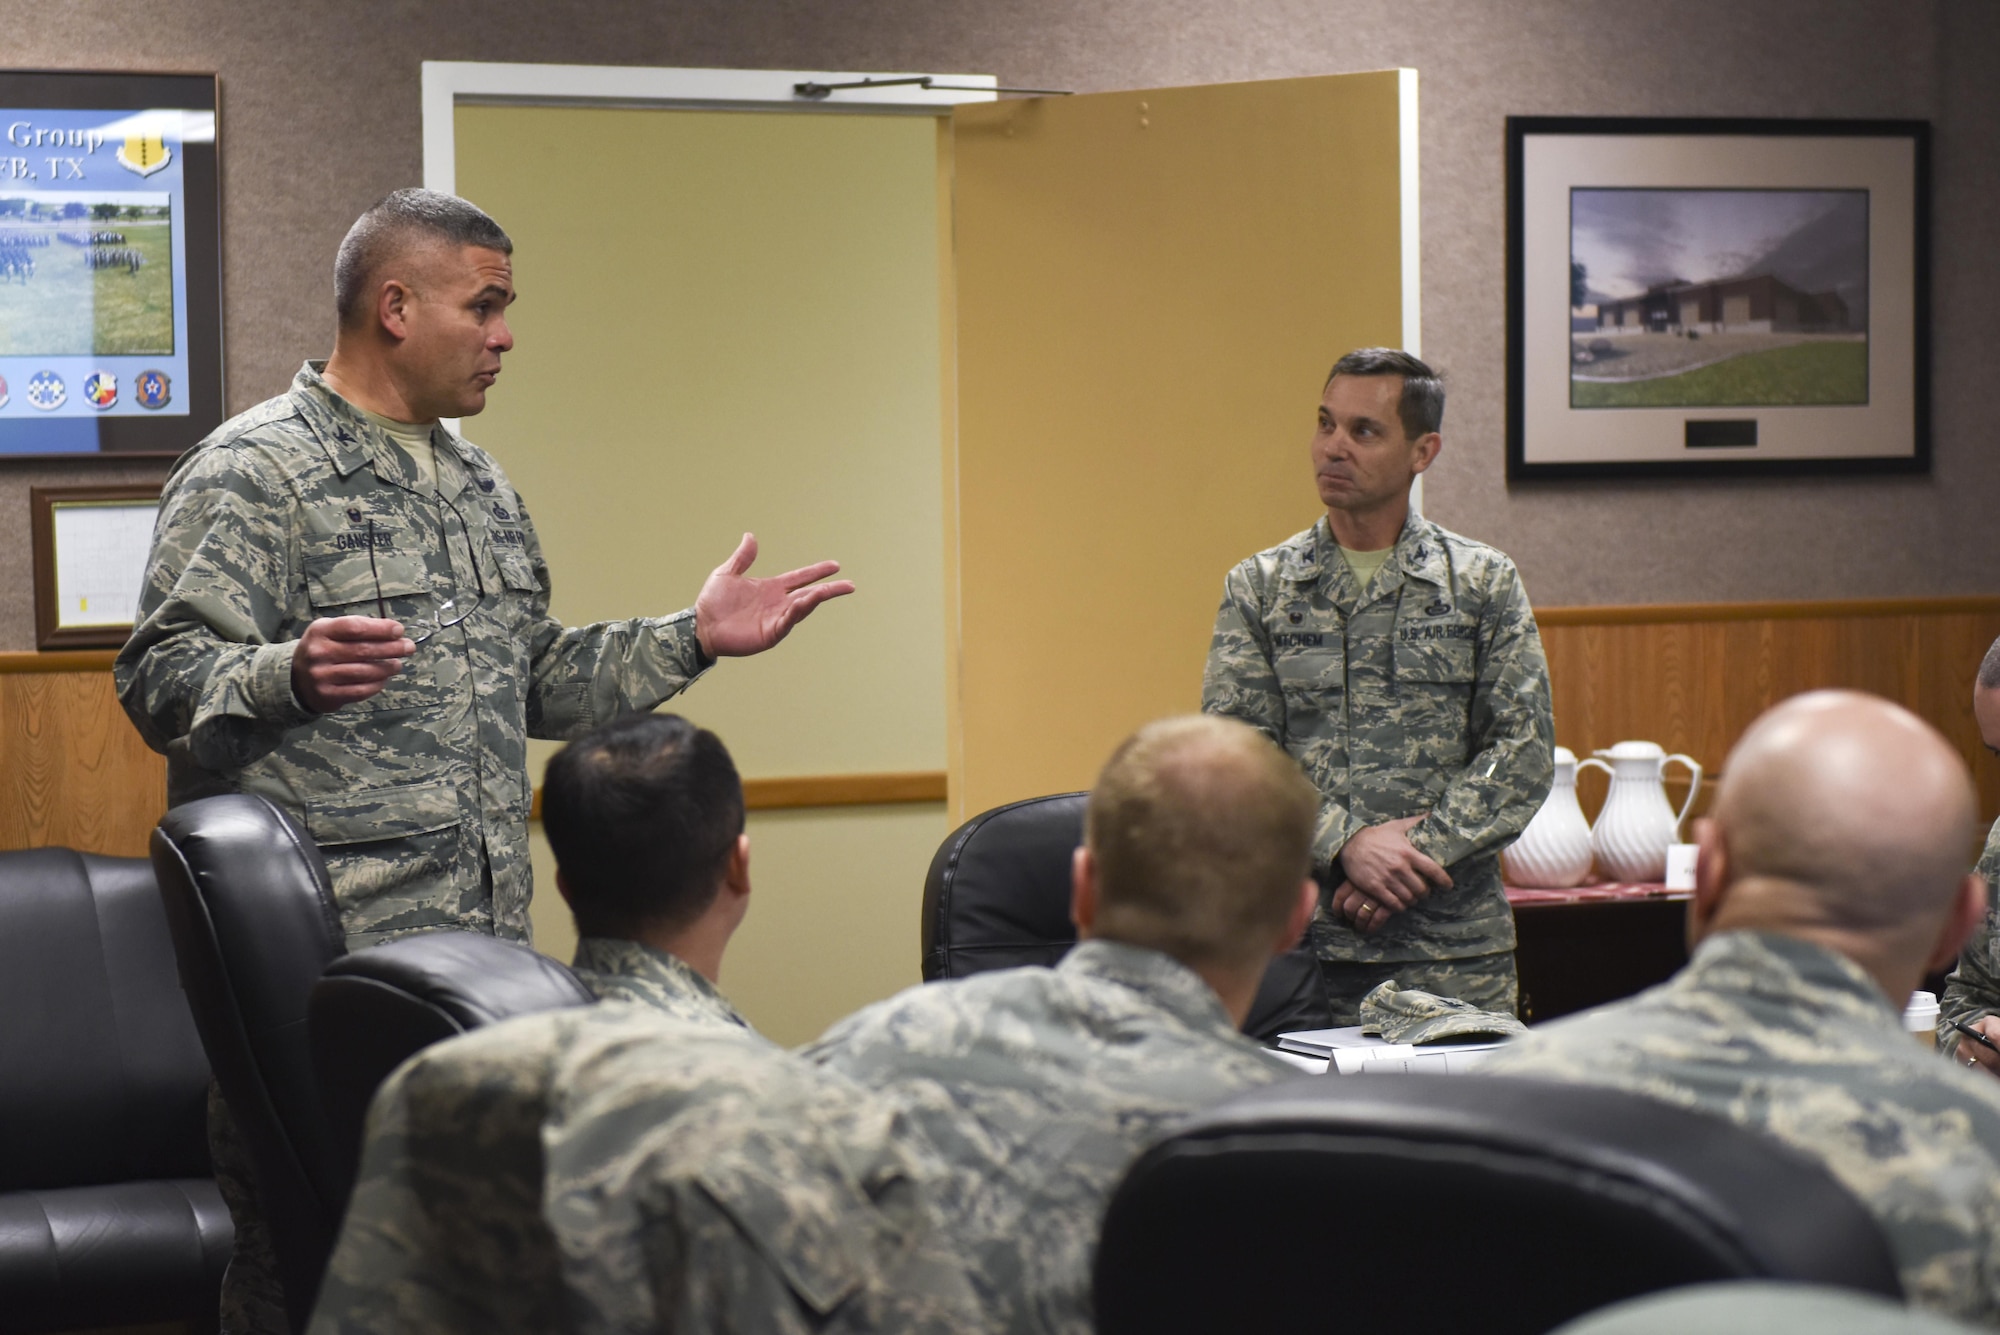 U.S. Air Force Col. Alejandro Ganster, 17th Training Group Commander, introduces Col. Mark Mitchem, 480th Intelligence, Surveillance and Reconnaissance Group Commander, at the Brandenburg Hall on Goodfellow Air Force Base, Texas, Feb. 9, 2017. Mitchem visited as part of an effort to line up resiliency training for first-term Airmen. (U.S. Air Force photo by Airman 1st Class Chase Sousa/Released)